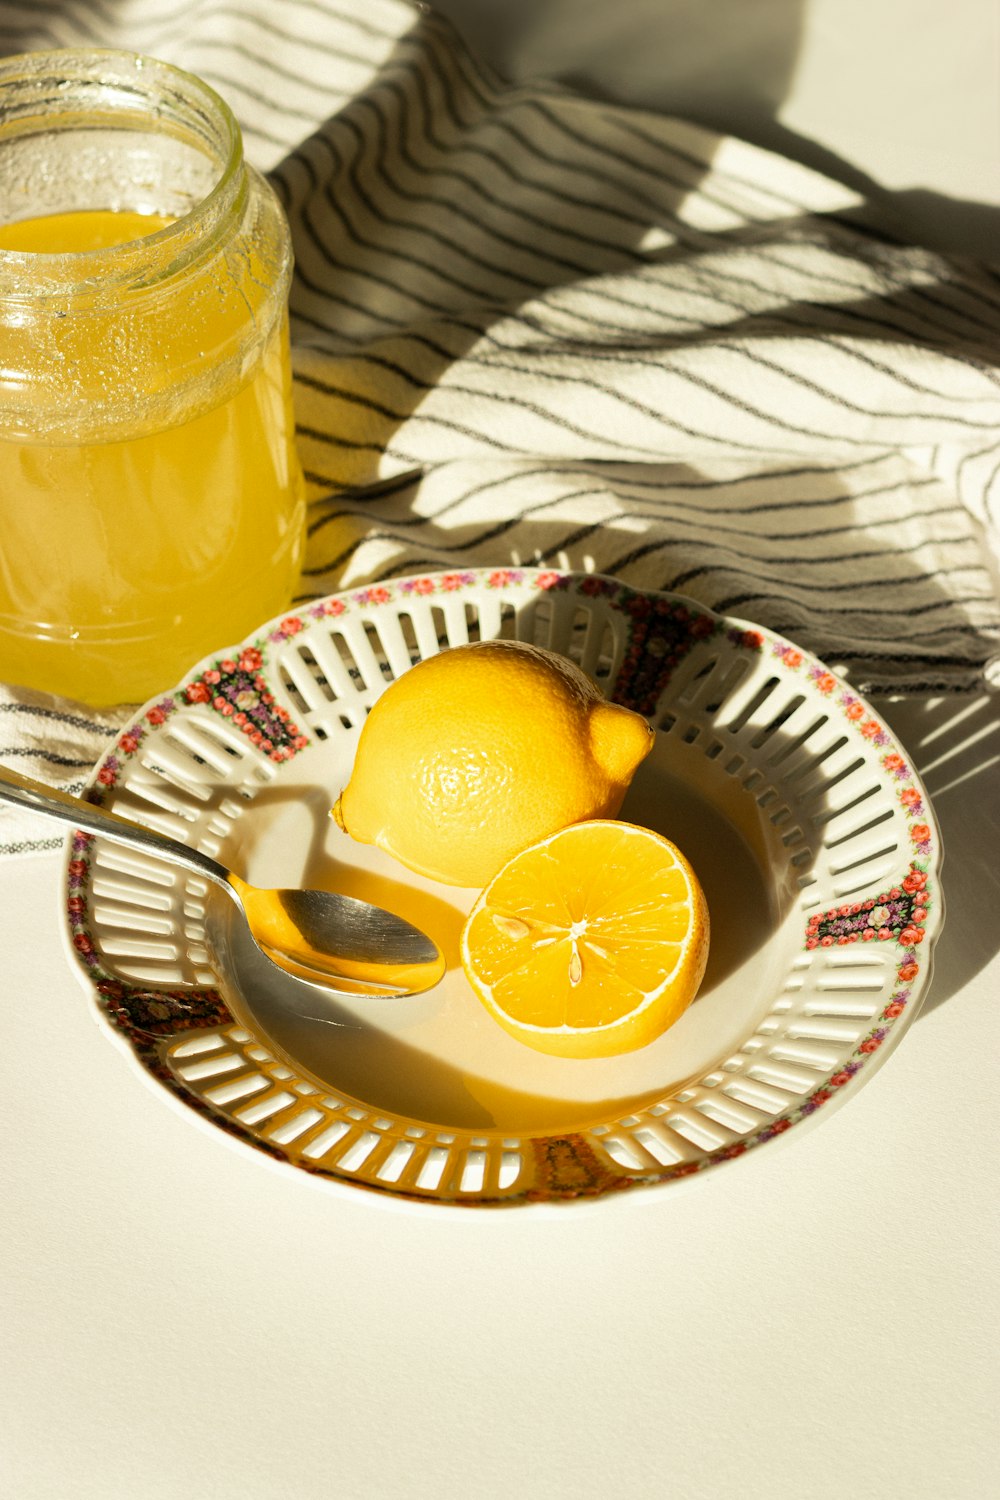 a bowl of lemons and a jar of honey on a table